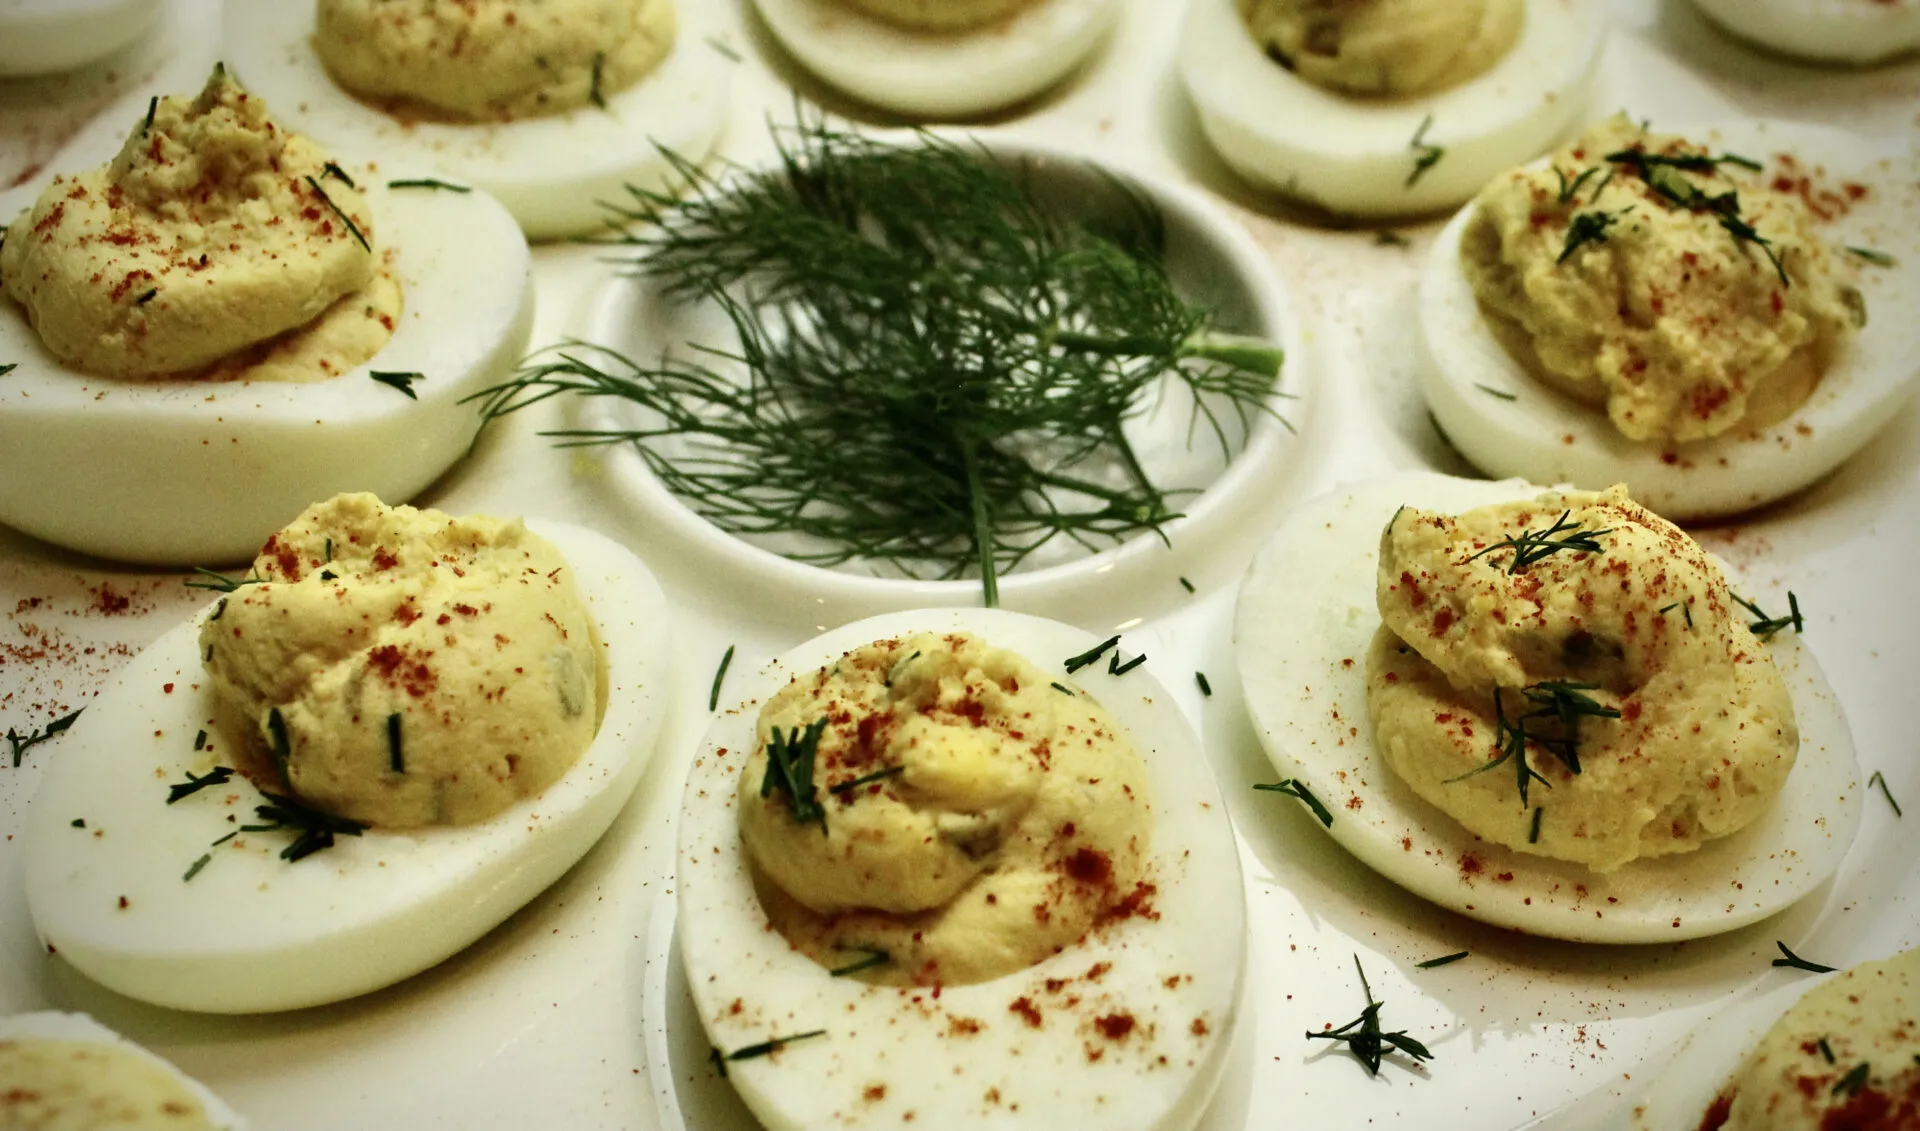 Deviled eggs made the southern way. Perfect for a summertime BBQ, potluck, or picnic!